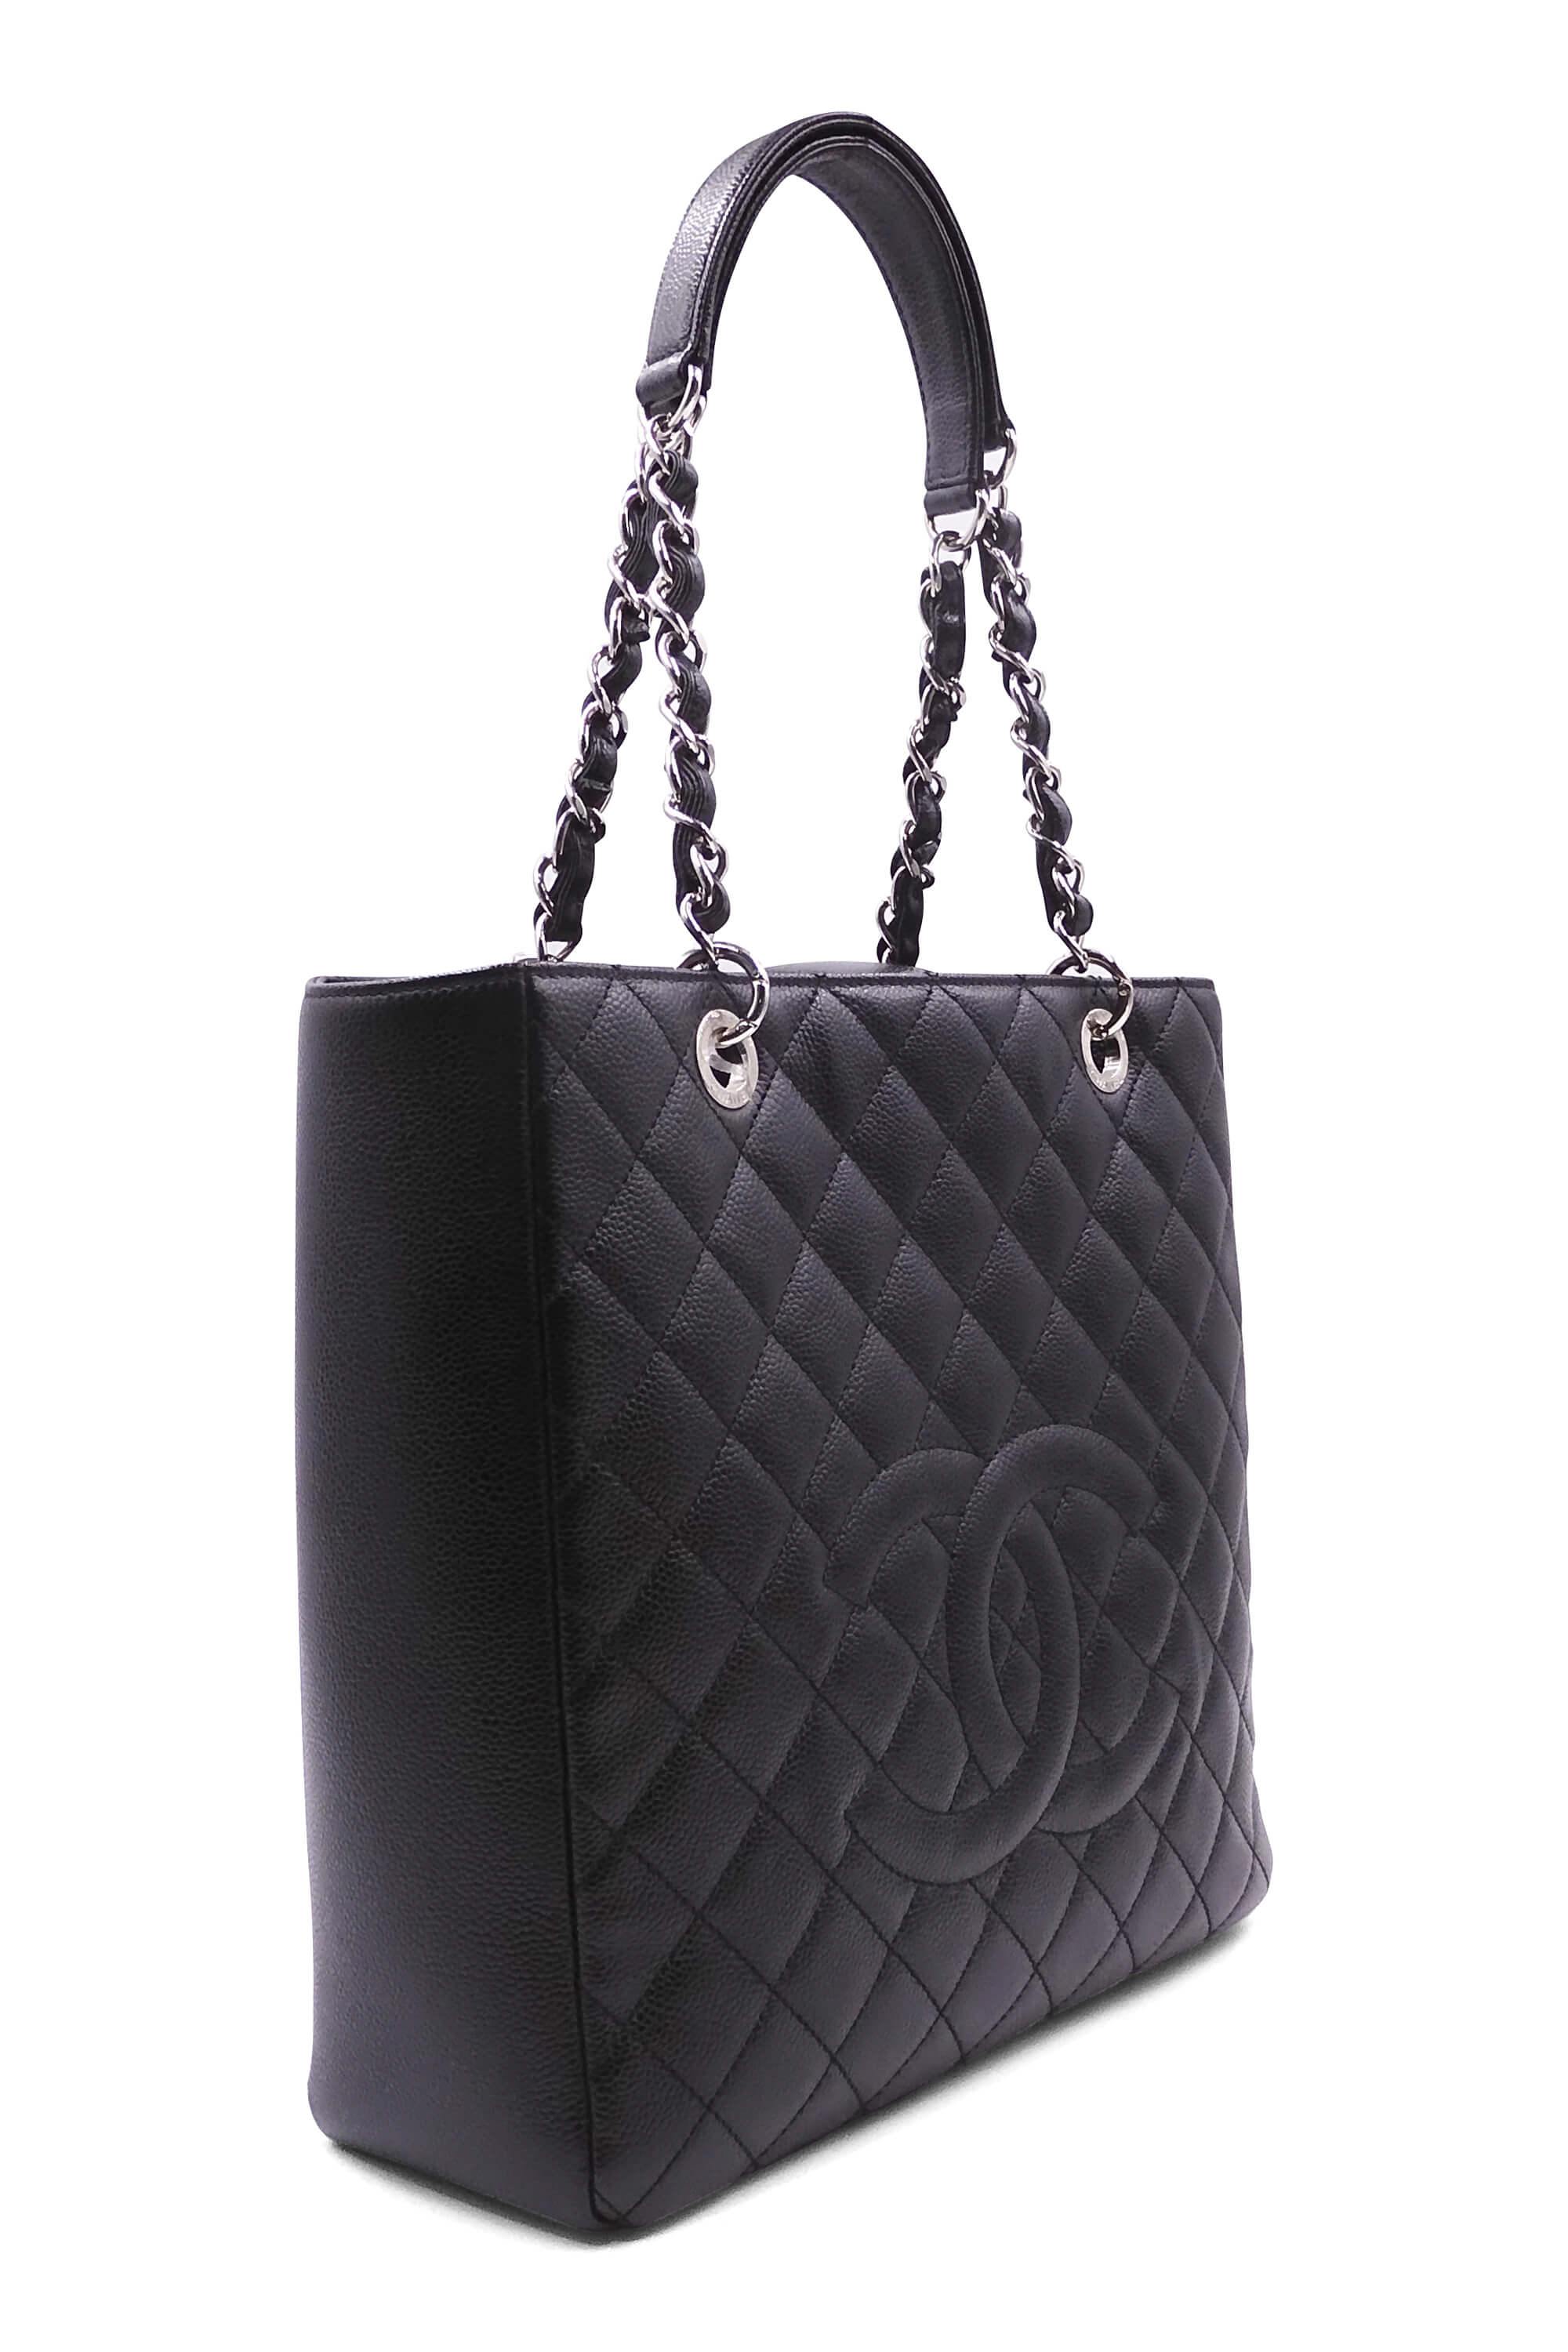 Chanel Off-White Quilted Caviar Petite Shopping Tote 233992